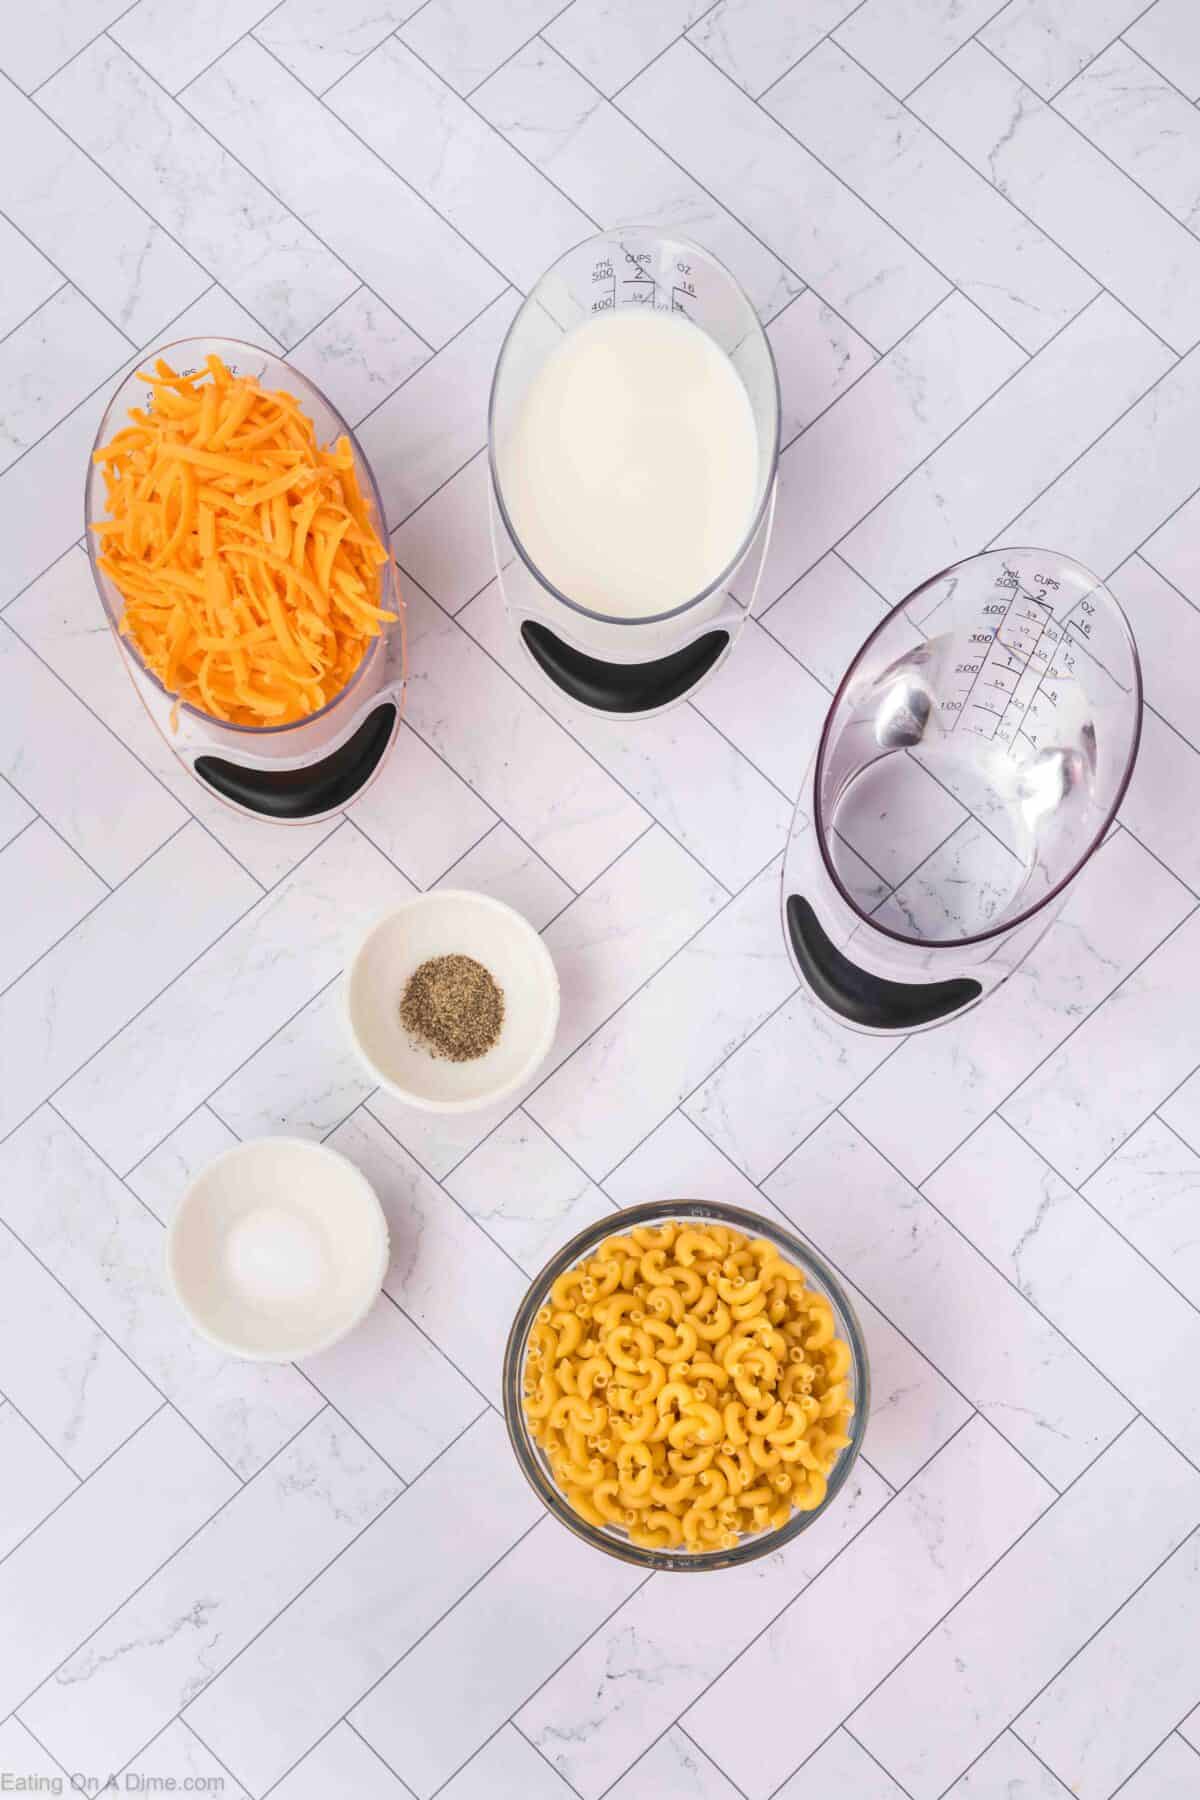 Ingredients for an easy homemade macaroni and cheese recipe laid out on a white tiled surface. Includes grated cheddar cheese, milk, pasta, salt, and pepper in separate bowls and measuring cups.